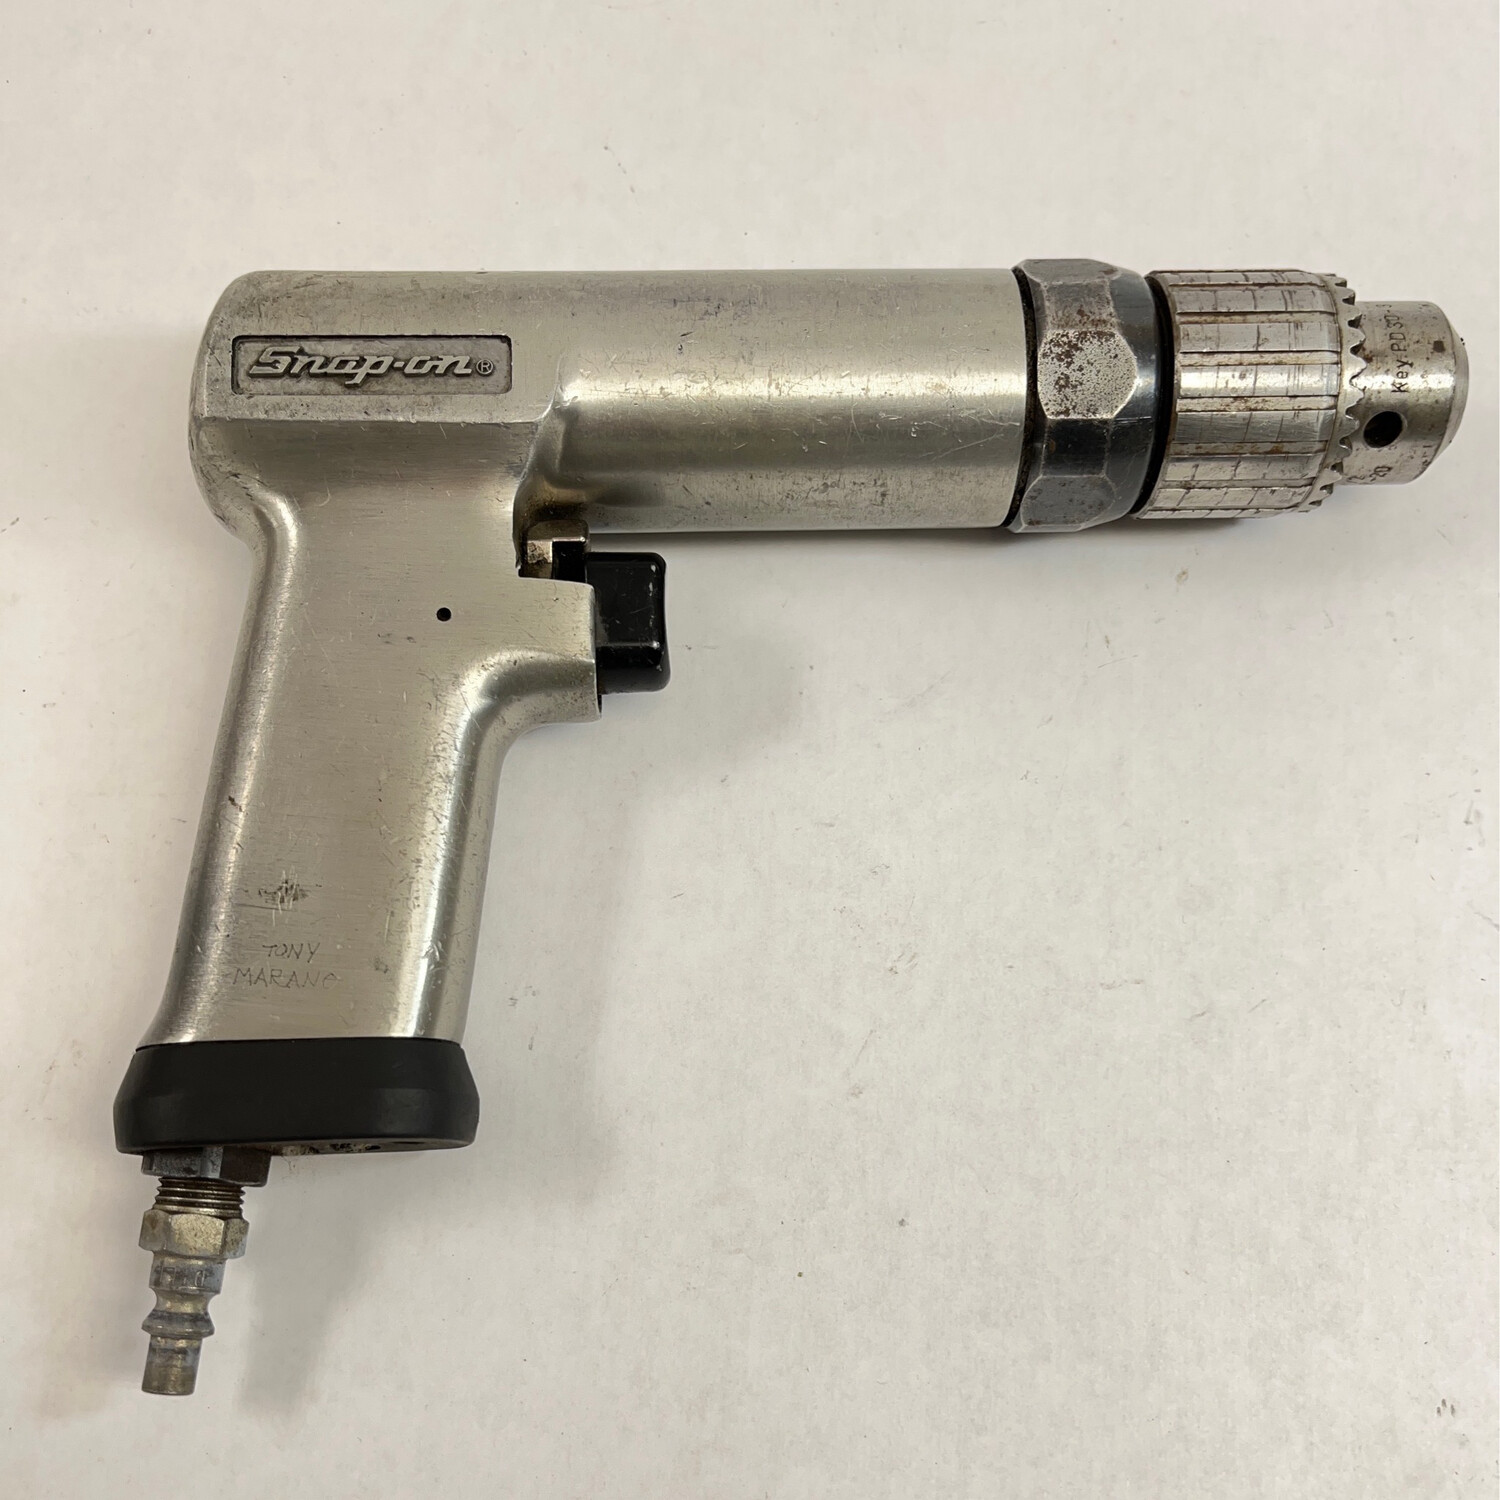 Snap On Pneumatic 1/2” Reversible Drill, PDR5A